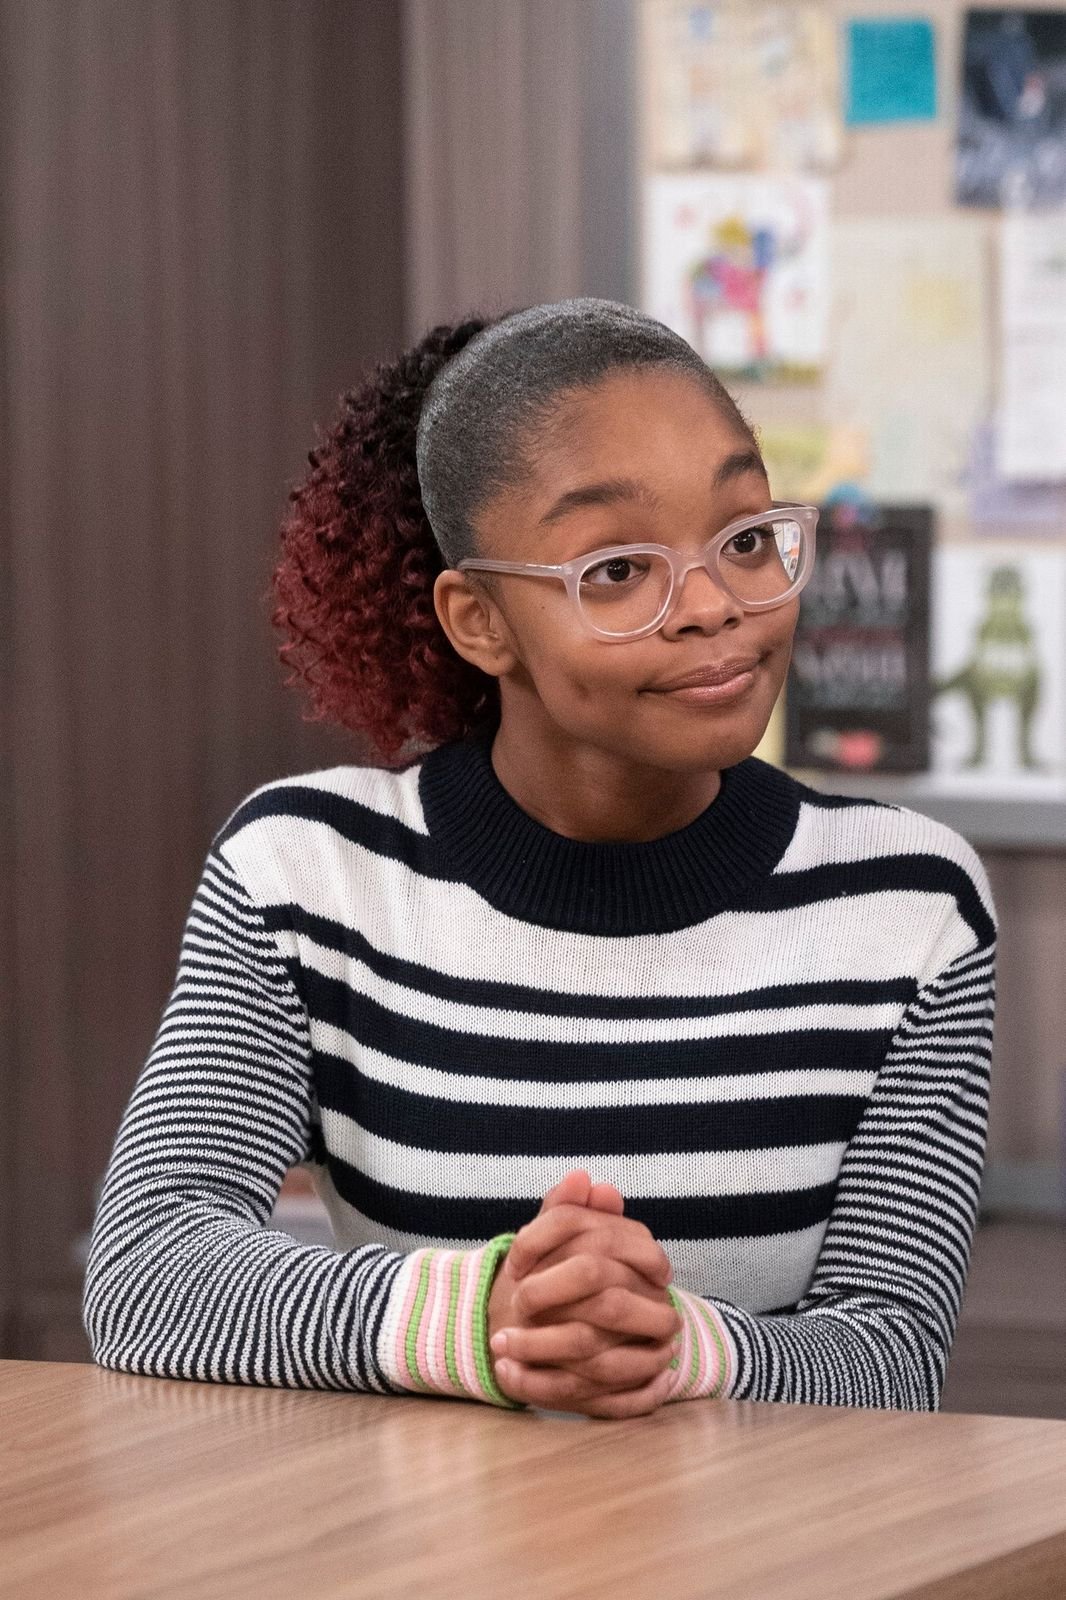 Marsai Martin on the set of "Black-ish's" "Is It Desert or Dessert" episode on March 08, 2019 | Photo: Getty Images